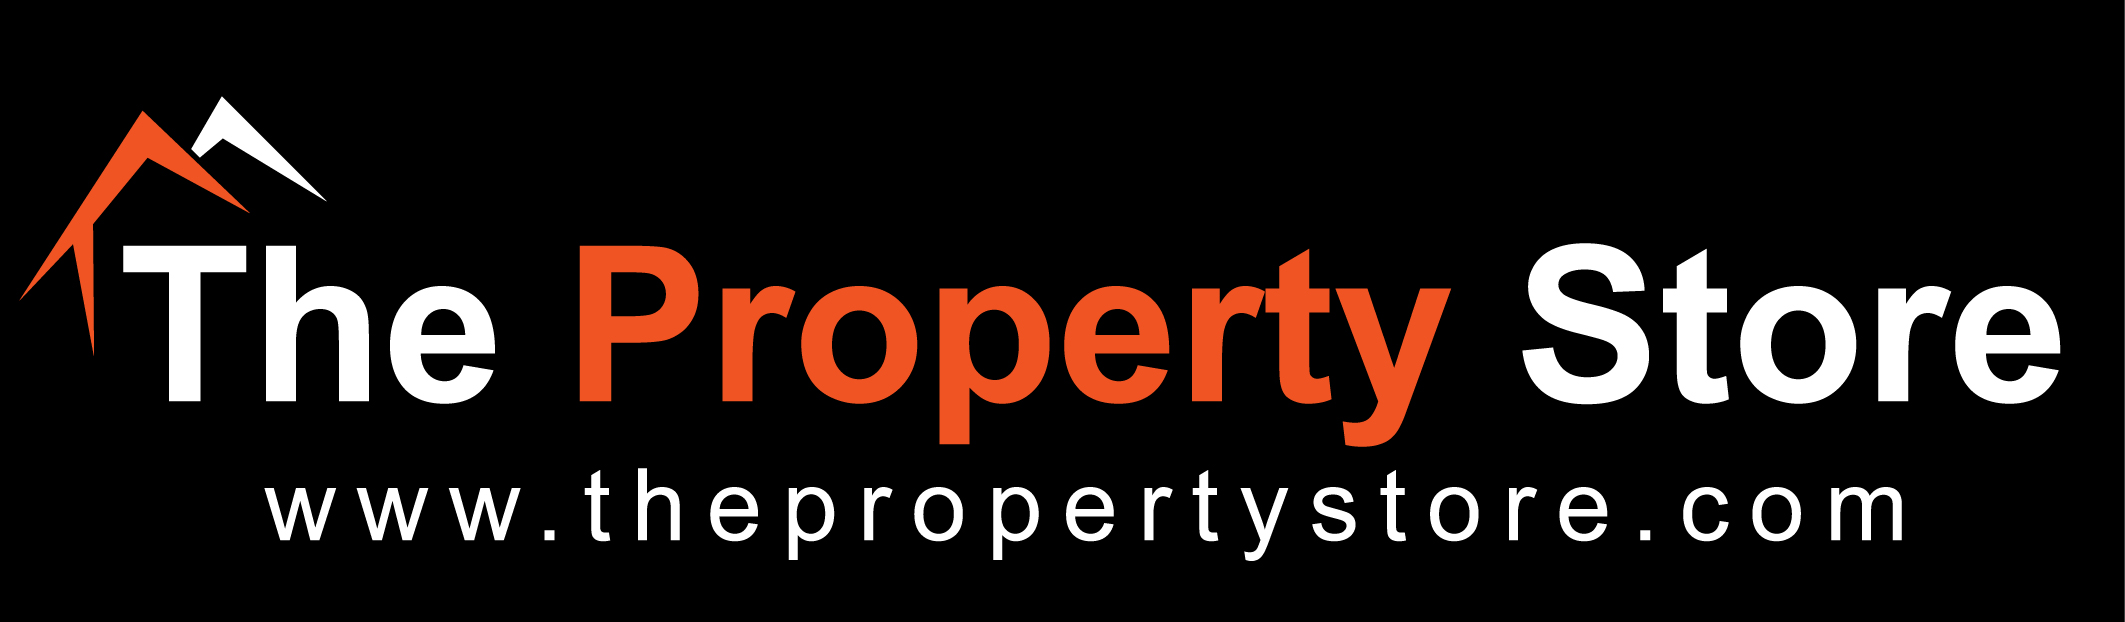 The Property Store Logo